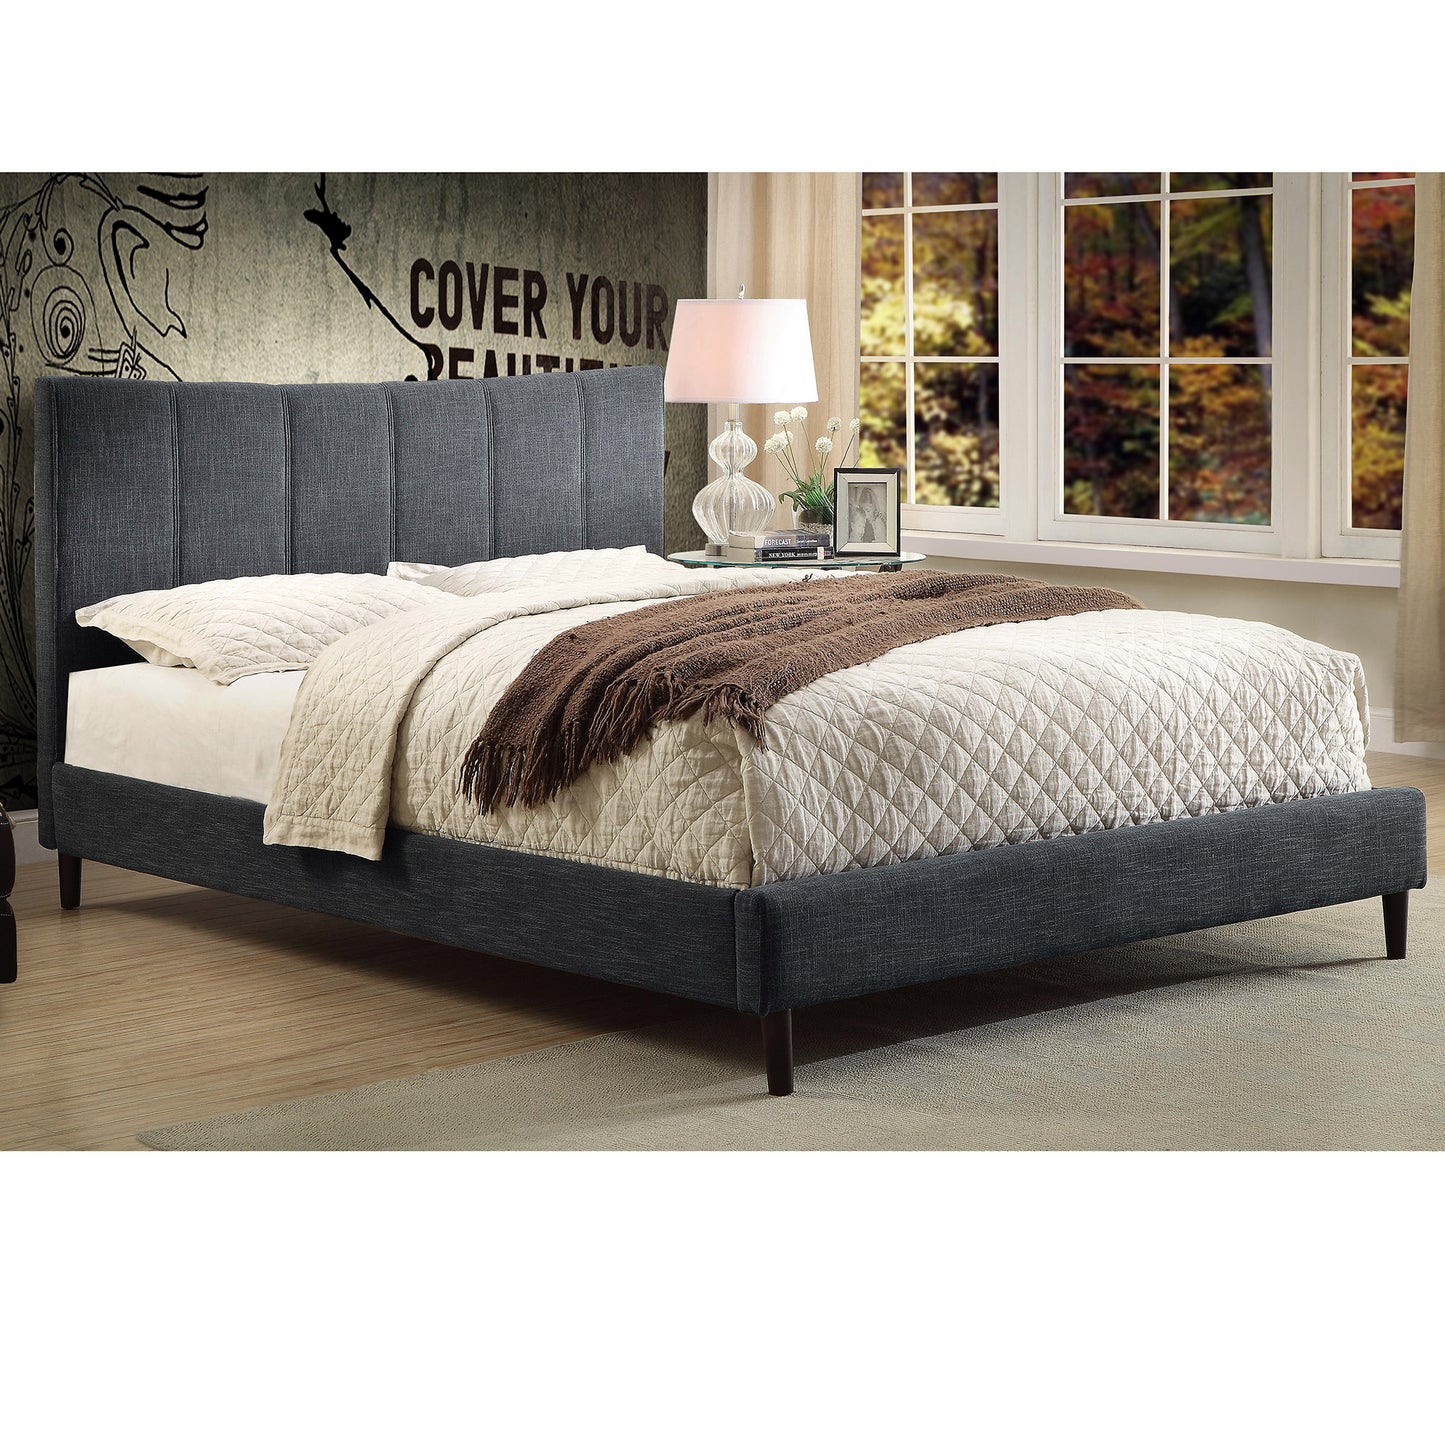 DOUBLE (FULL) SIZE- (RIMO GREY) - LINEN FABRIC - BED FRAME- WITH SLATS- INVENTORY CLEARANCE